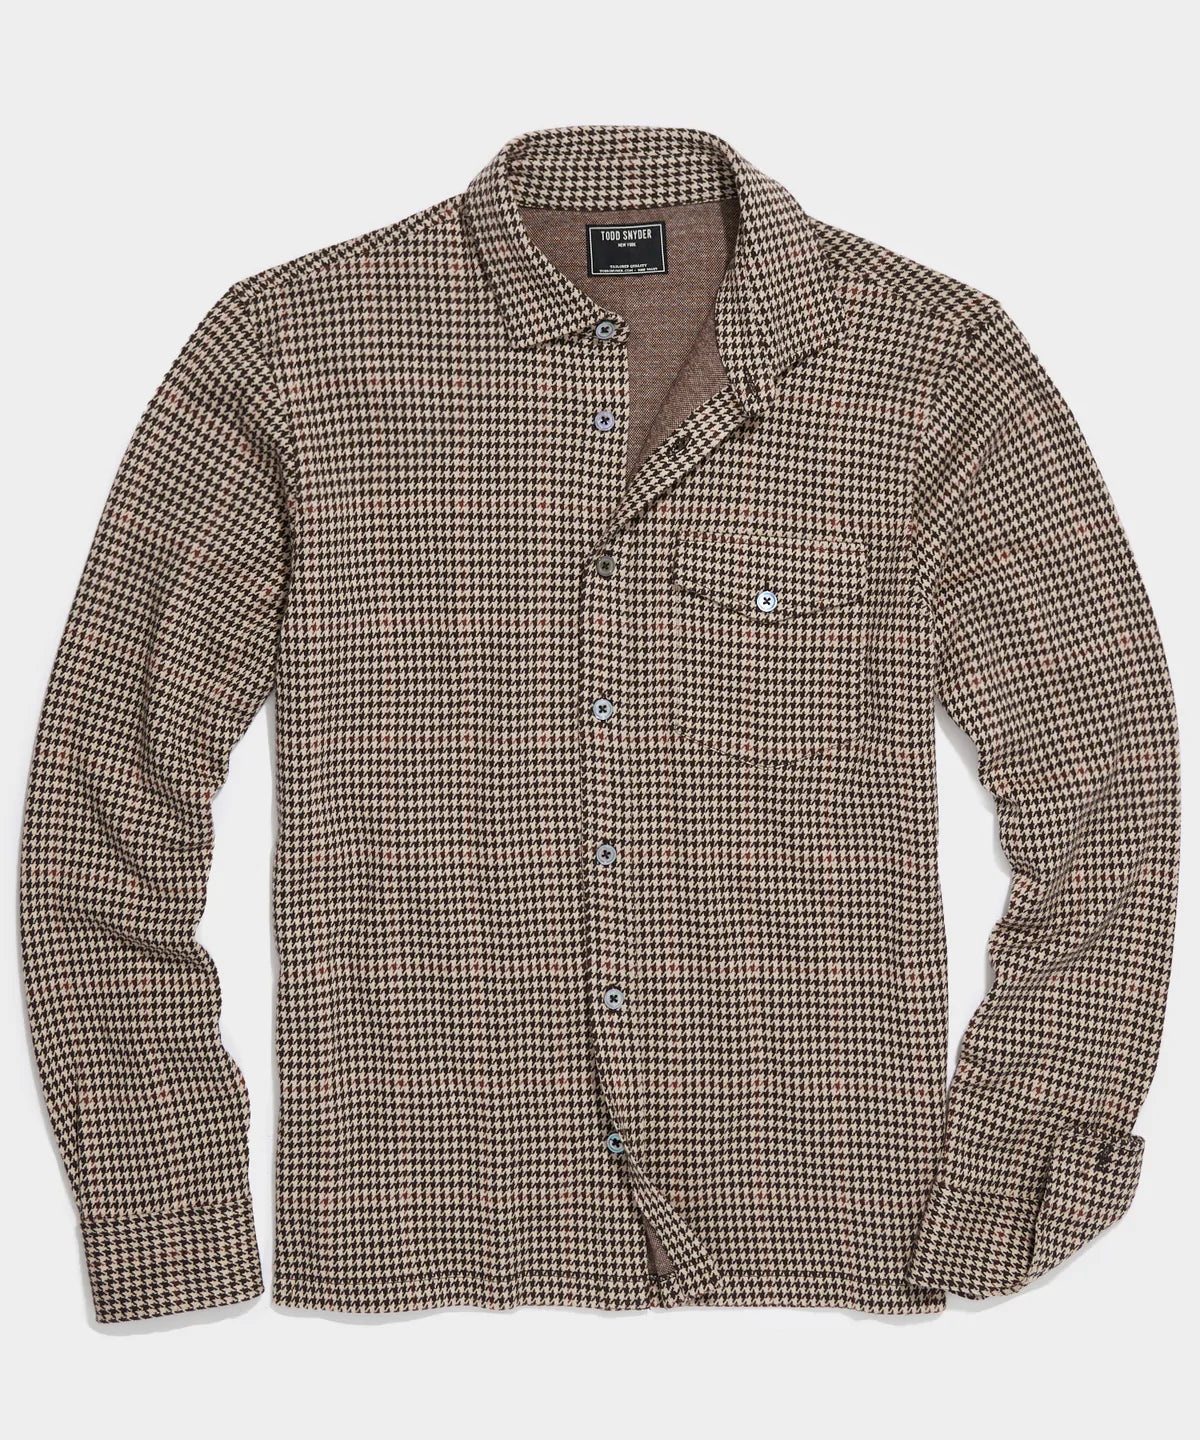 Todd Snyder - TODD SNYDER HOUNDSTOOTH DOUBLE KNIT POLO IN SADDLE BROWN - Rent With Thred